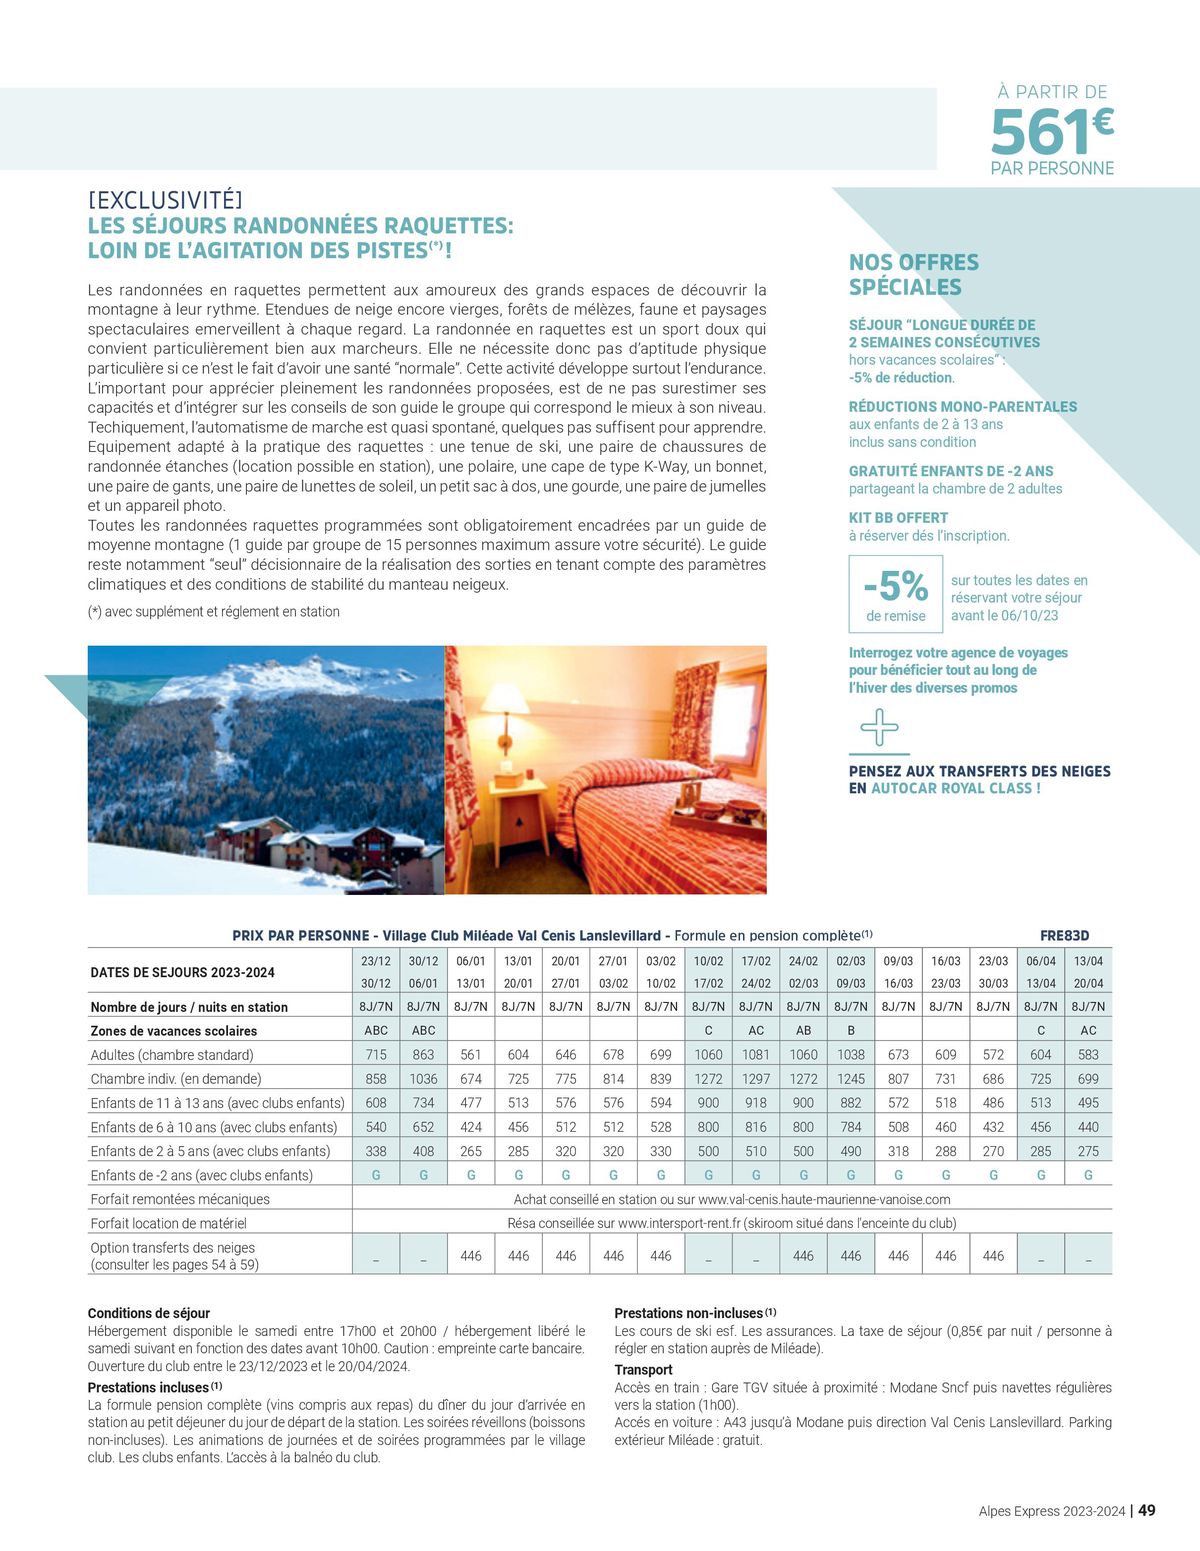 Catalogue Alpes Express - Hiver 2023 - 2024, page 00049